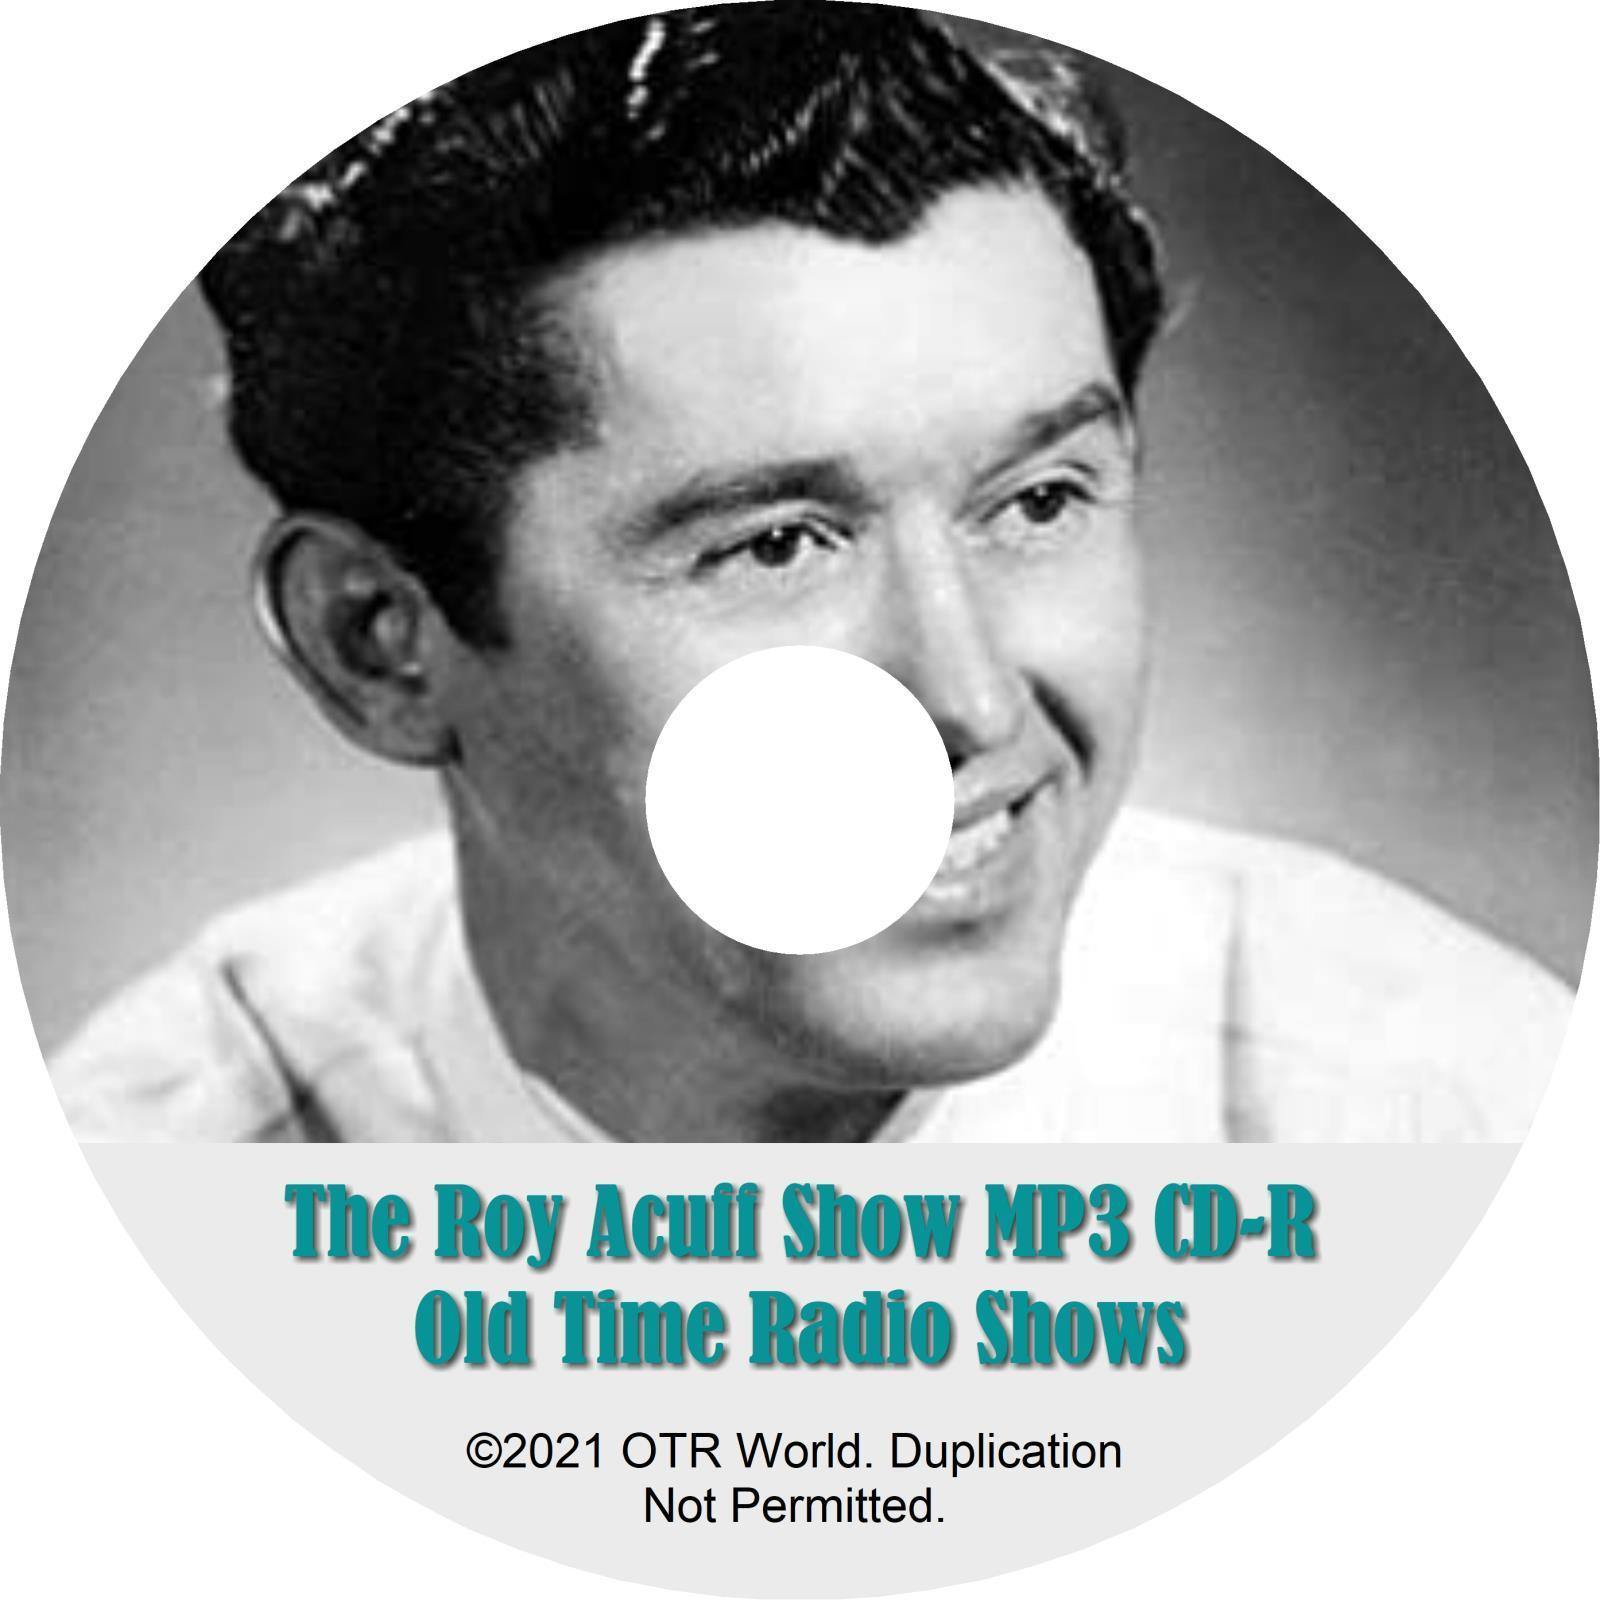 The Roy Acuff Show OTR OTRS Old Time Radio Shows MP3 On CD-R 23 Episodes - OTR World